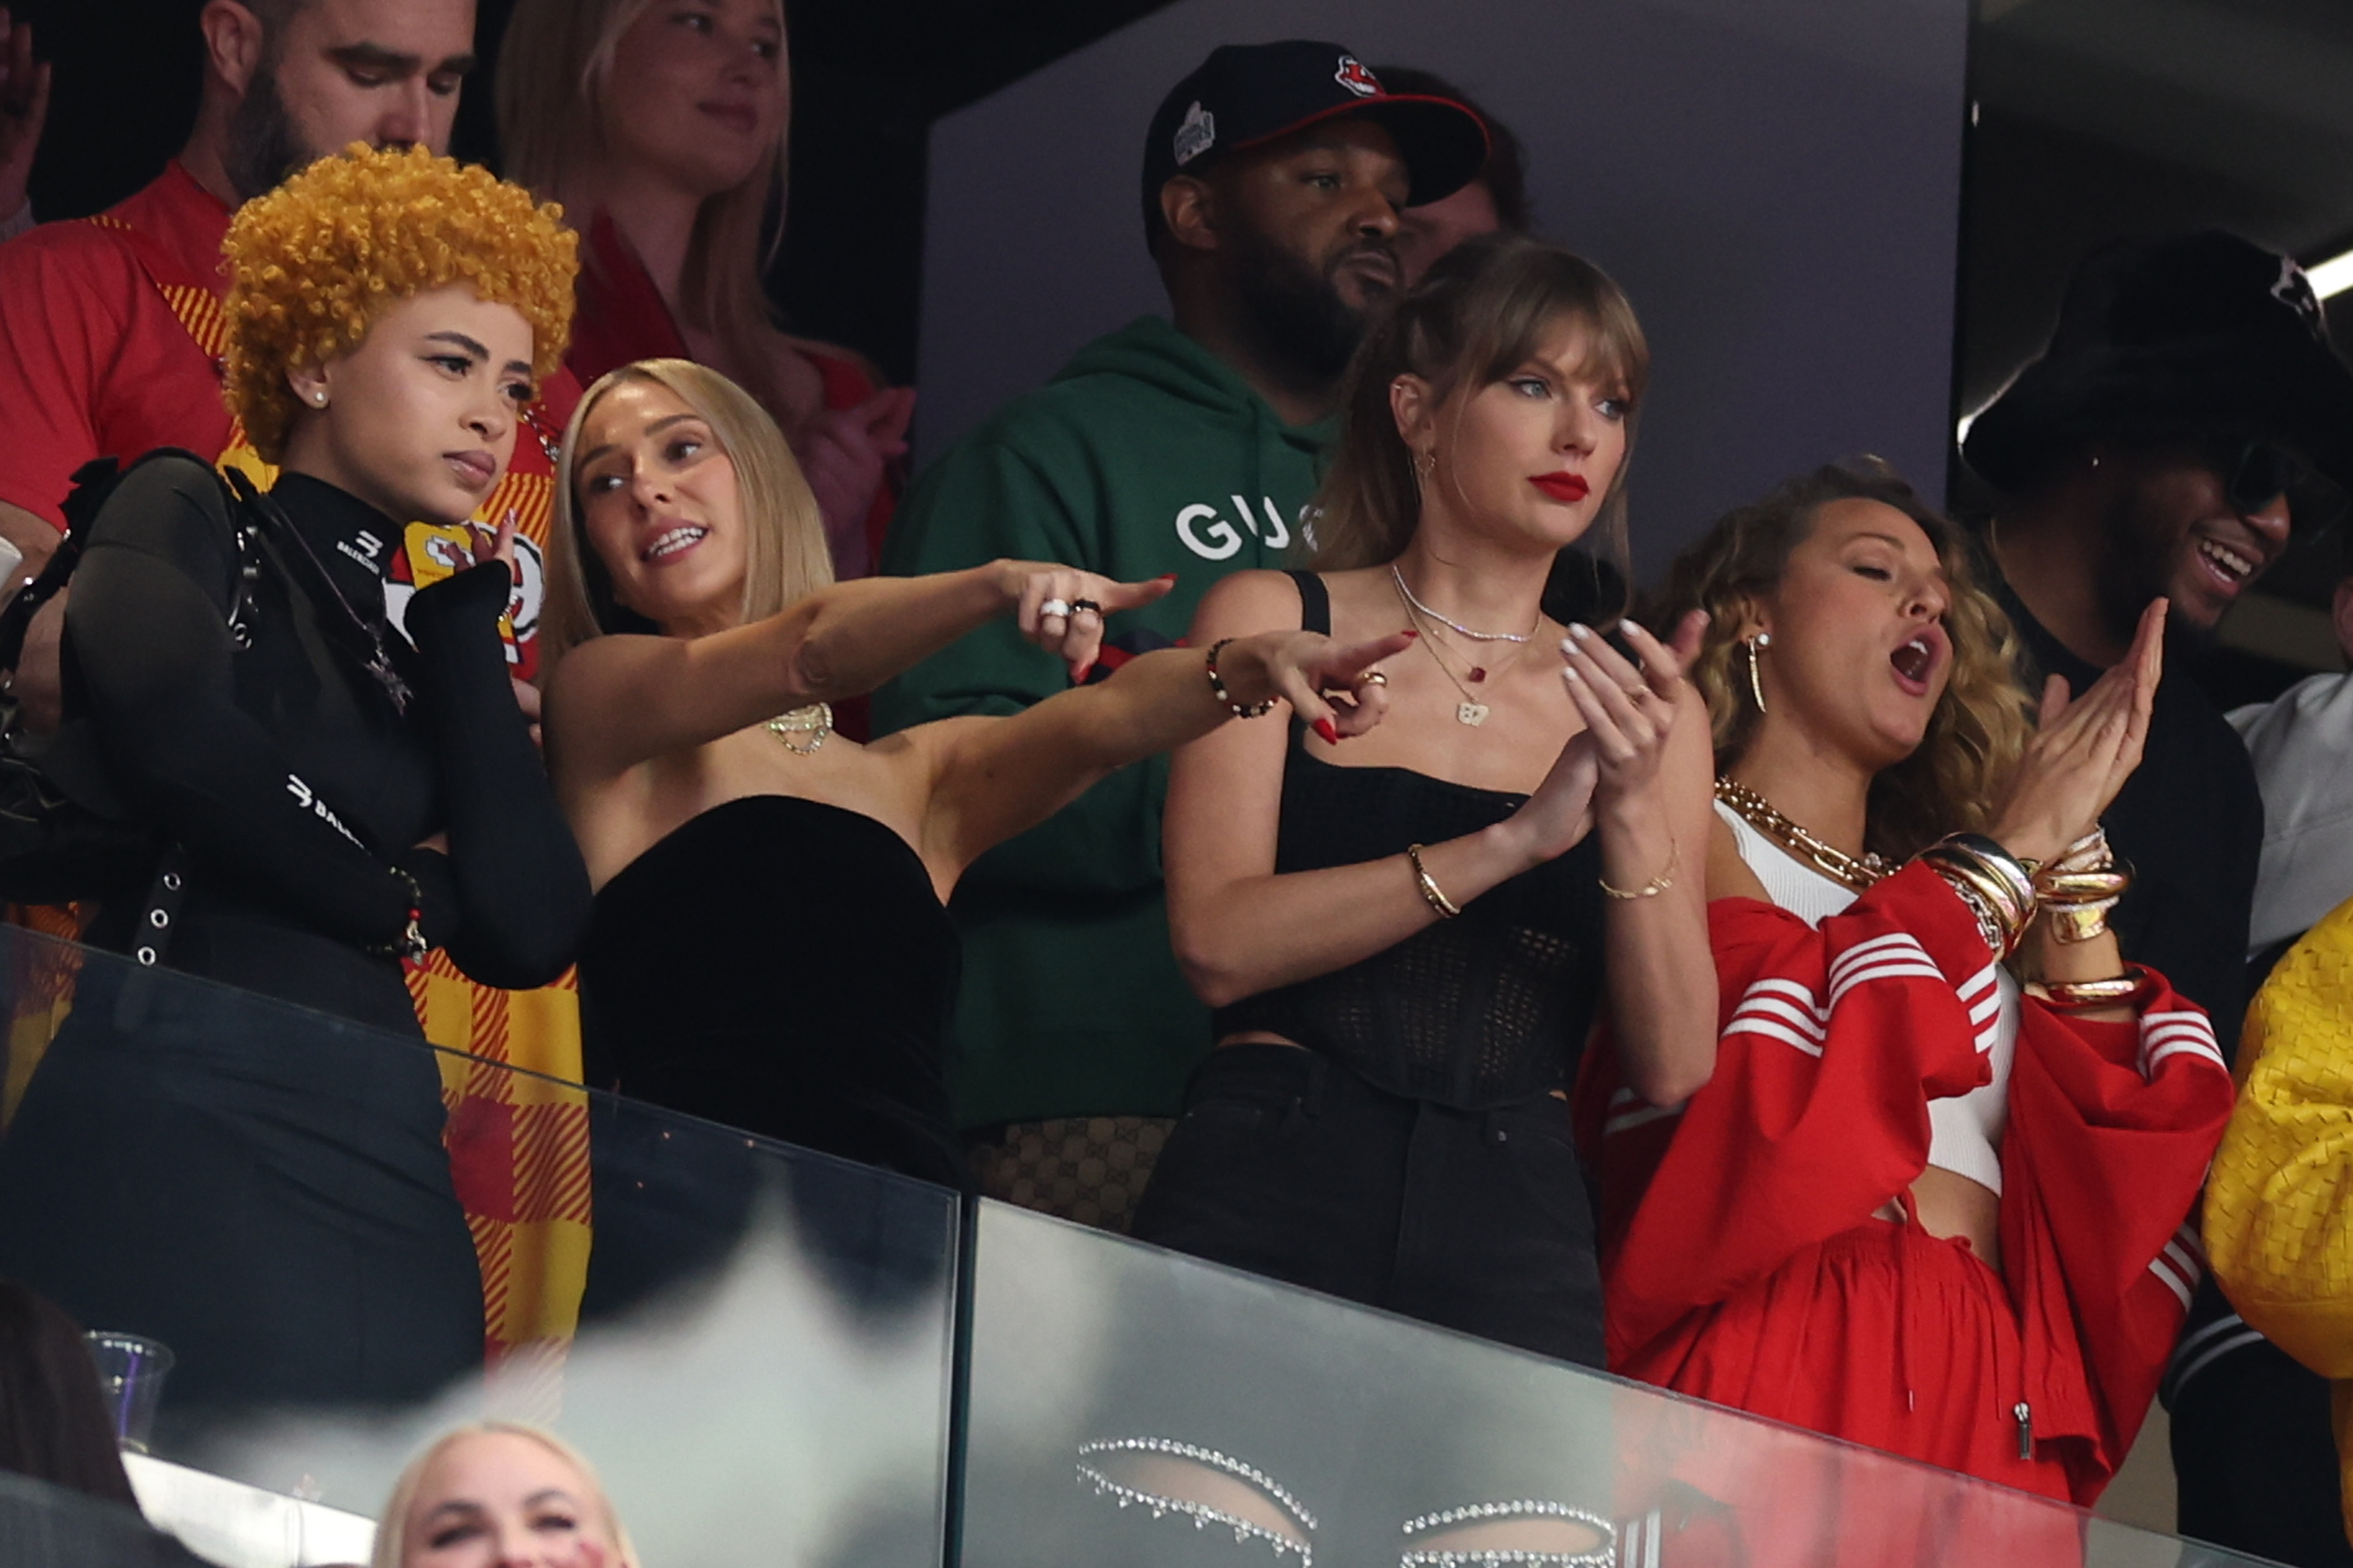 Group of people including Taylor Swift in a stadium box reacting excitedly during an event. Taylor is in a red outfit